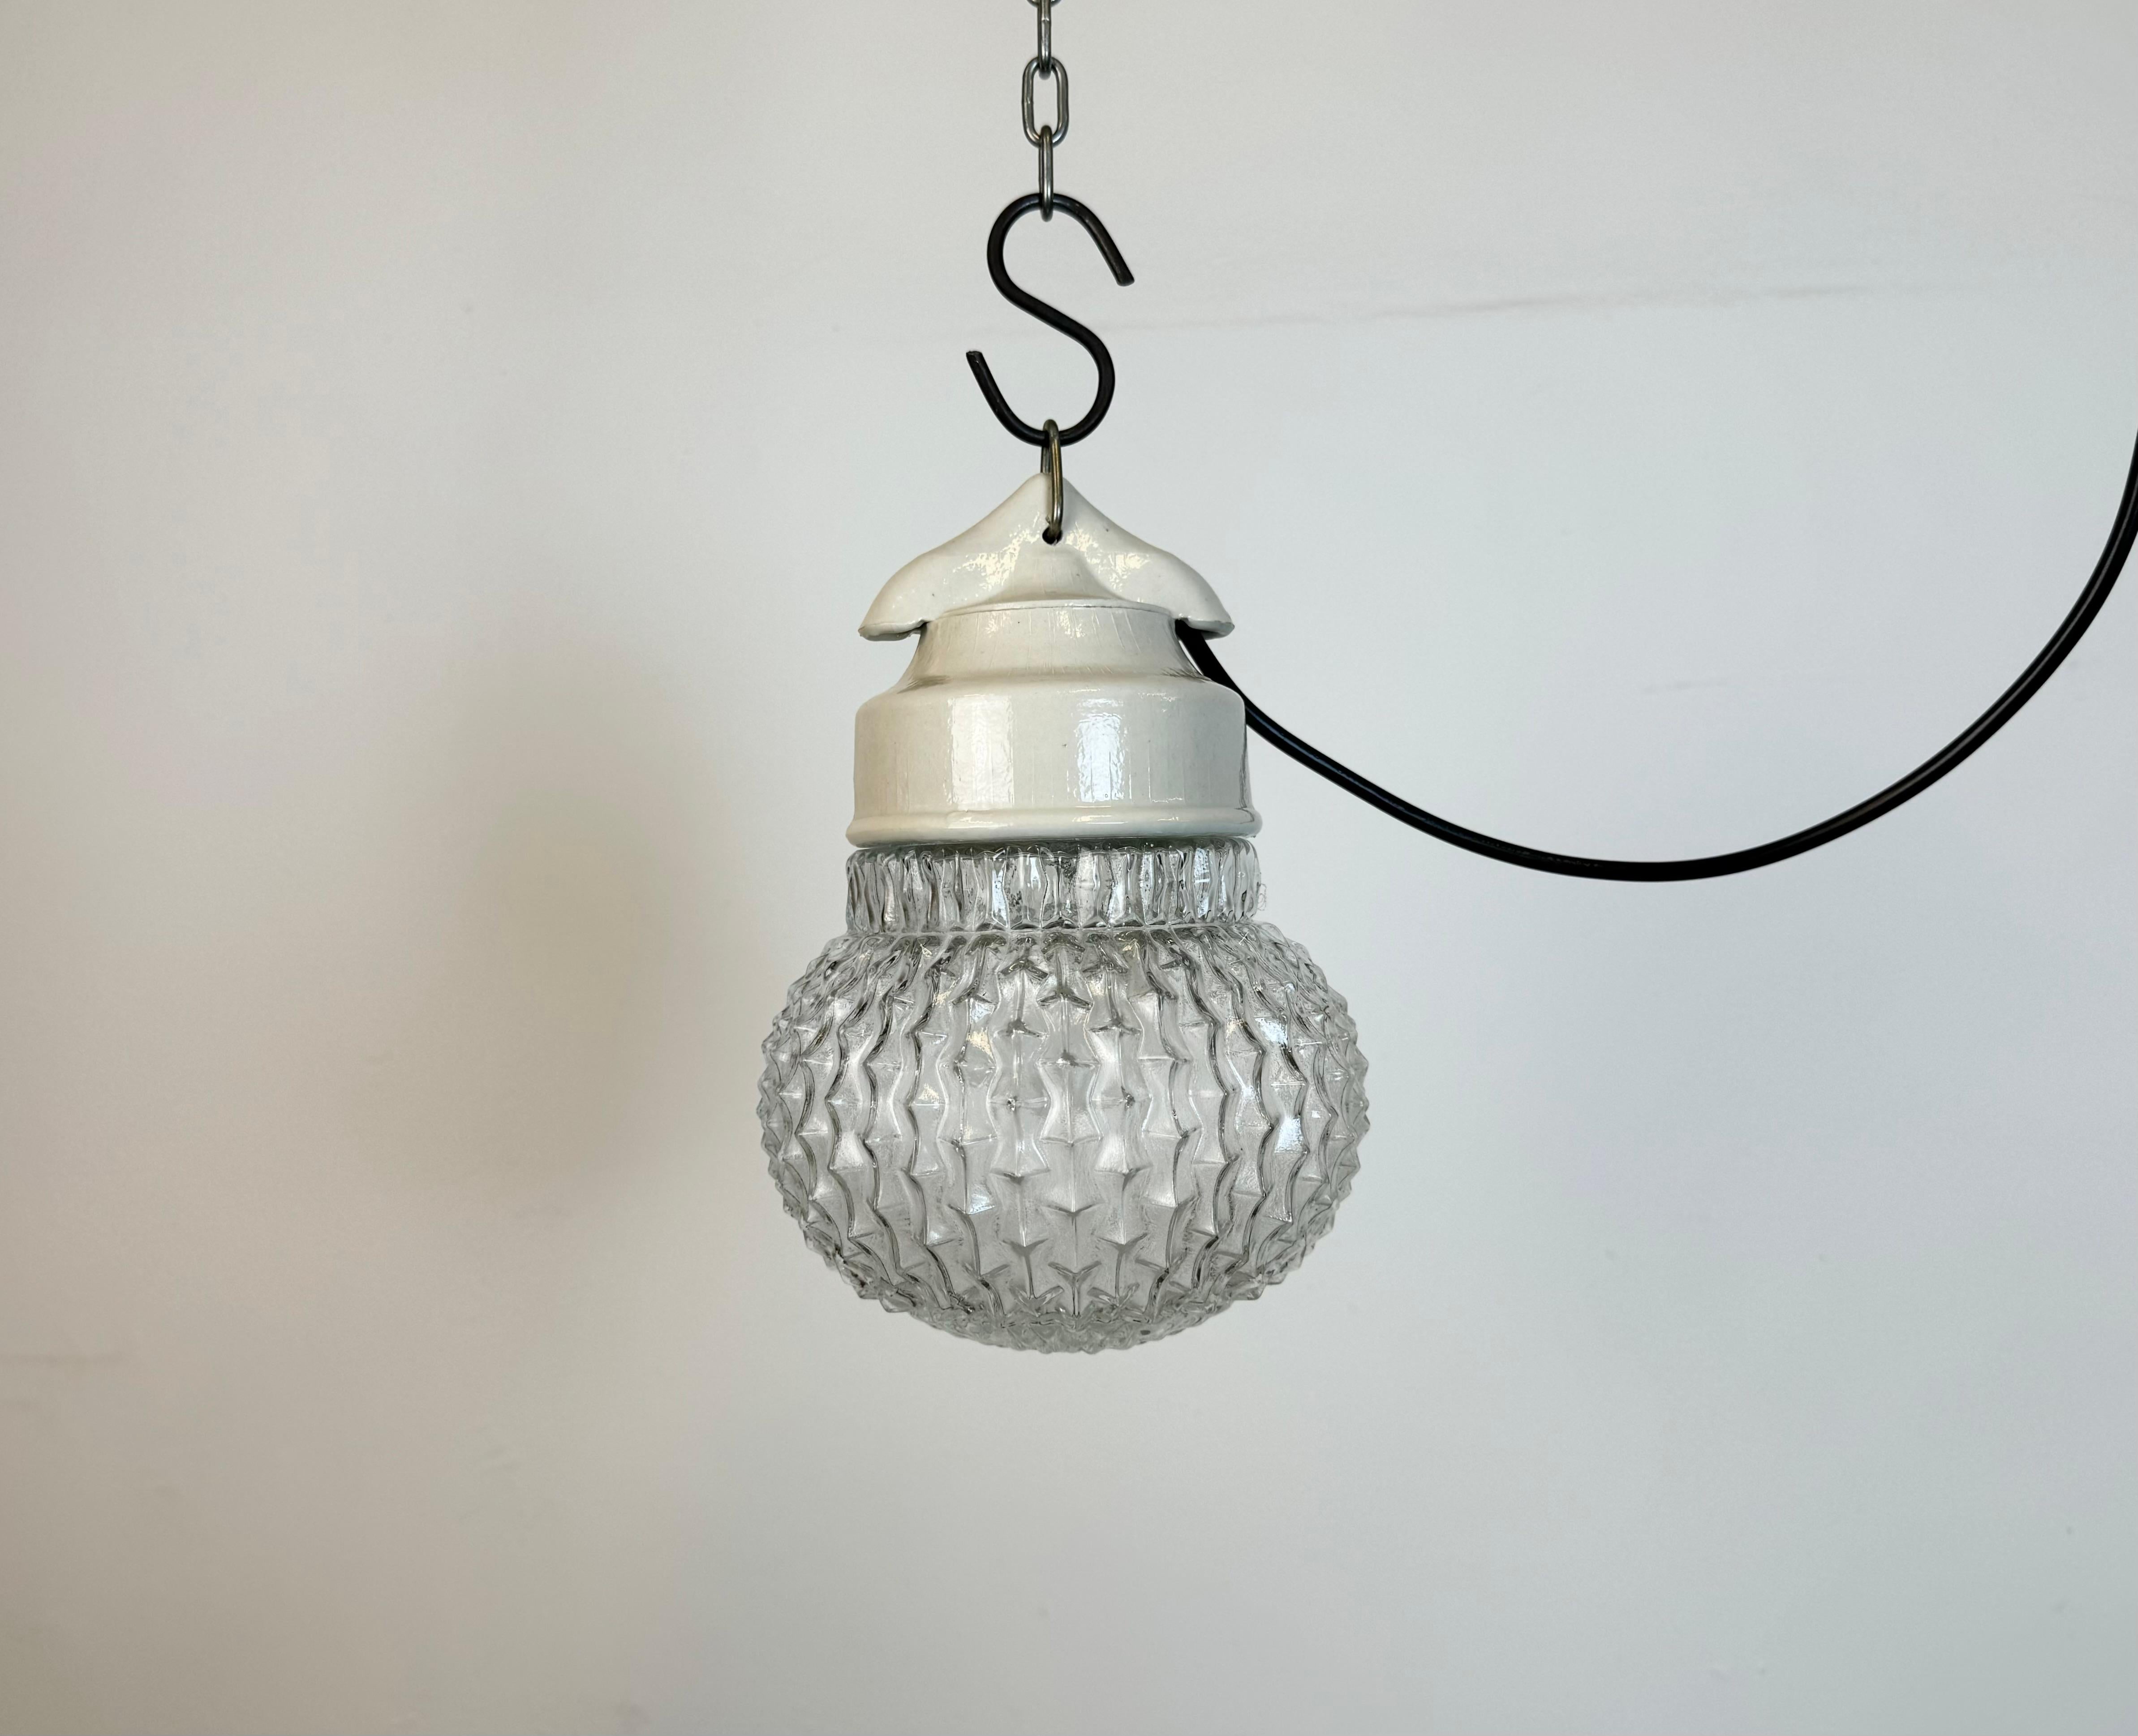 Vintage industrial light made in former Czechoslovakia  during the 1970s. It features a white porcelain top and a glass cover. The socket requires standard E27/ E26 light bulbs. New wire. The weight of the light is 1 kg.
Dimensions:
Diameter of the